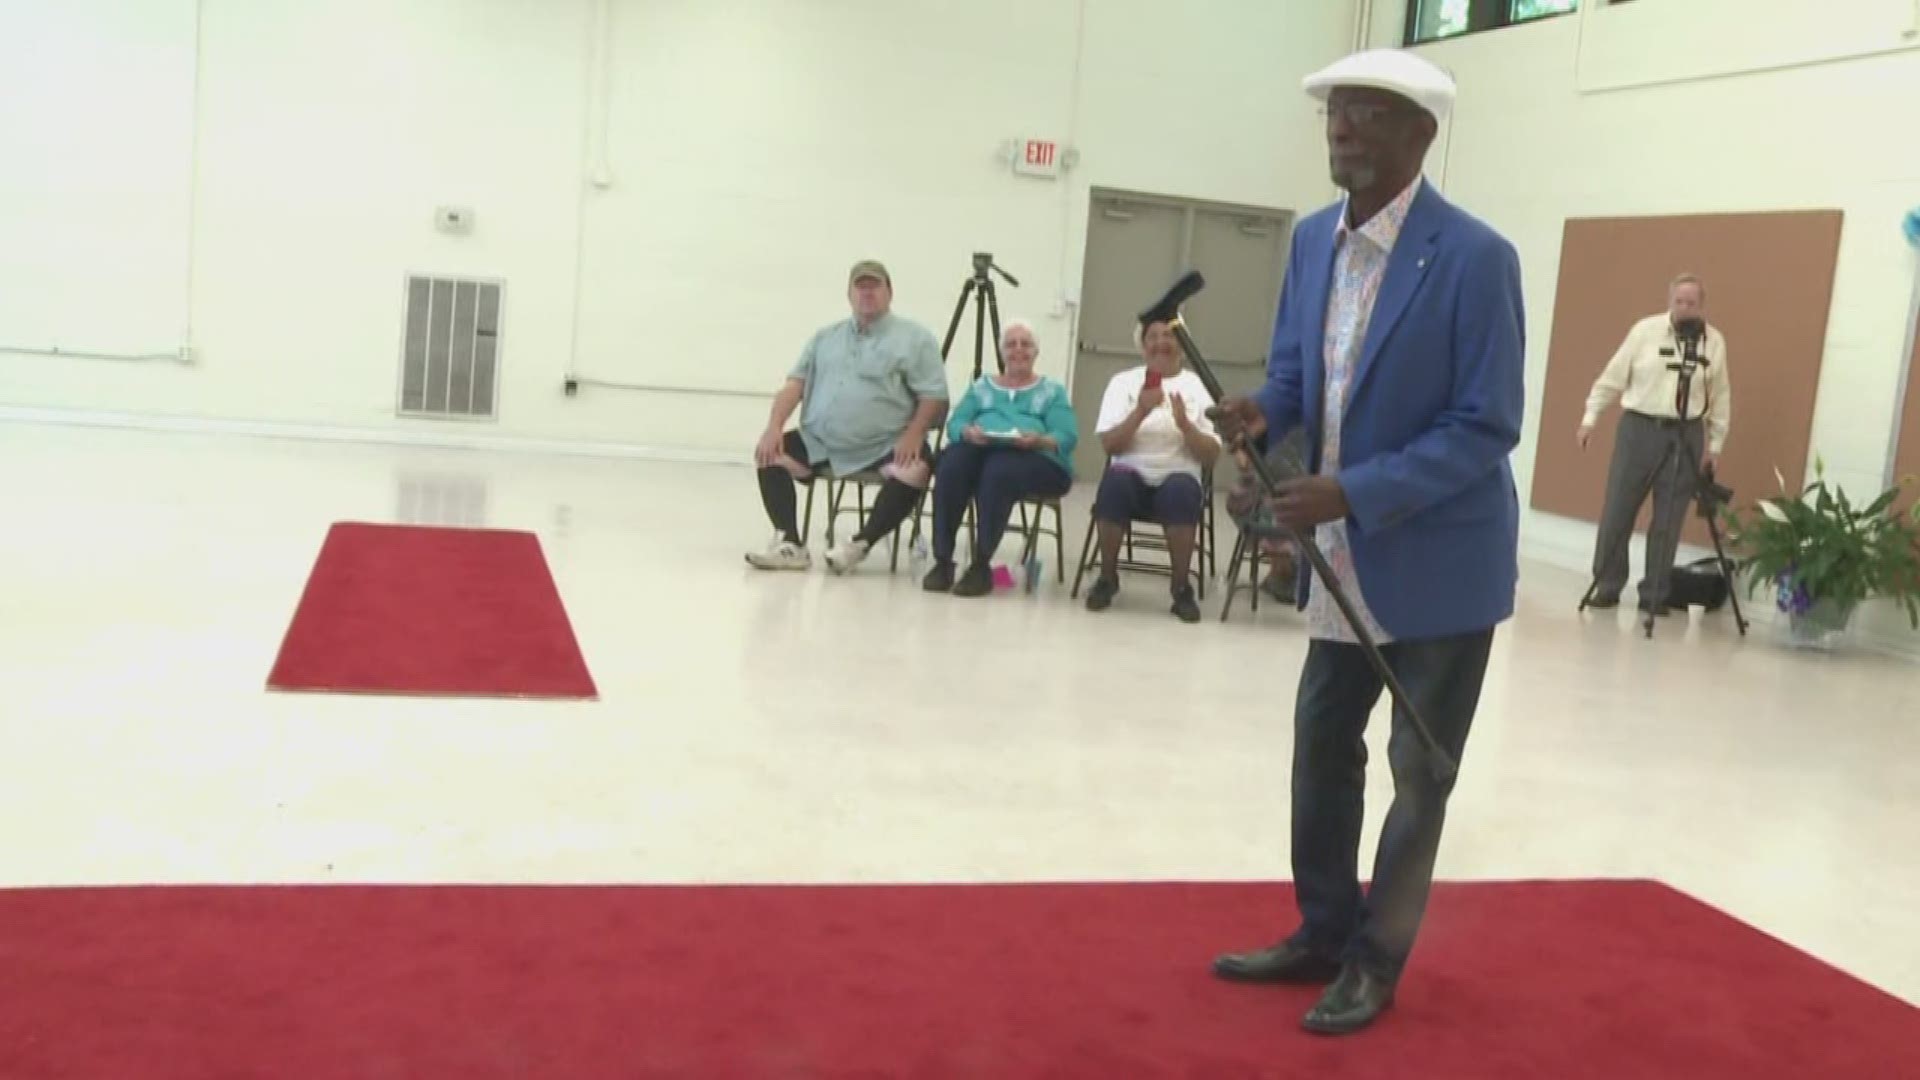 May marks Older American's month, and to celebrate, the city of Knoxville held its first-ever senior citizen fashion show at the Larry Cox Senior Center. Seniors wore clothes from Stein Mart and everyone took notice. May 8, 2019-4pm